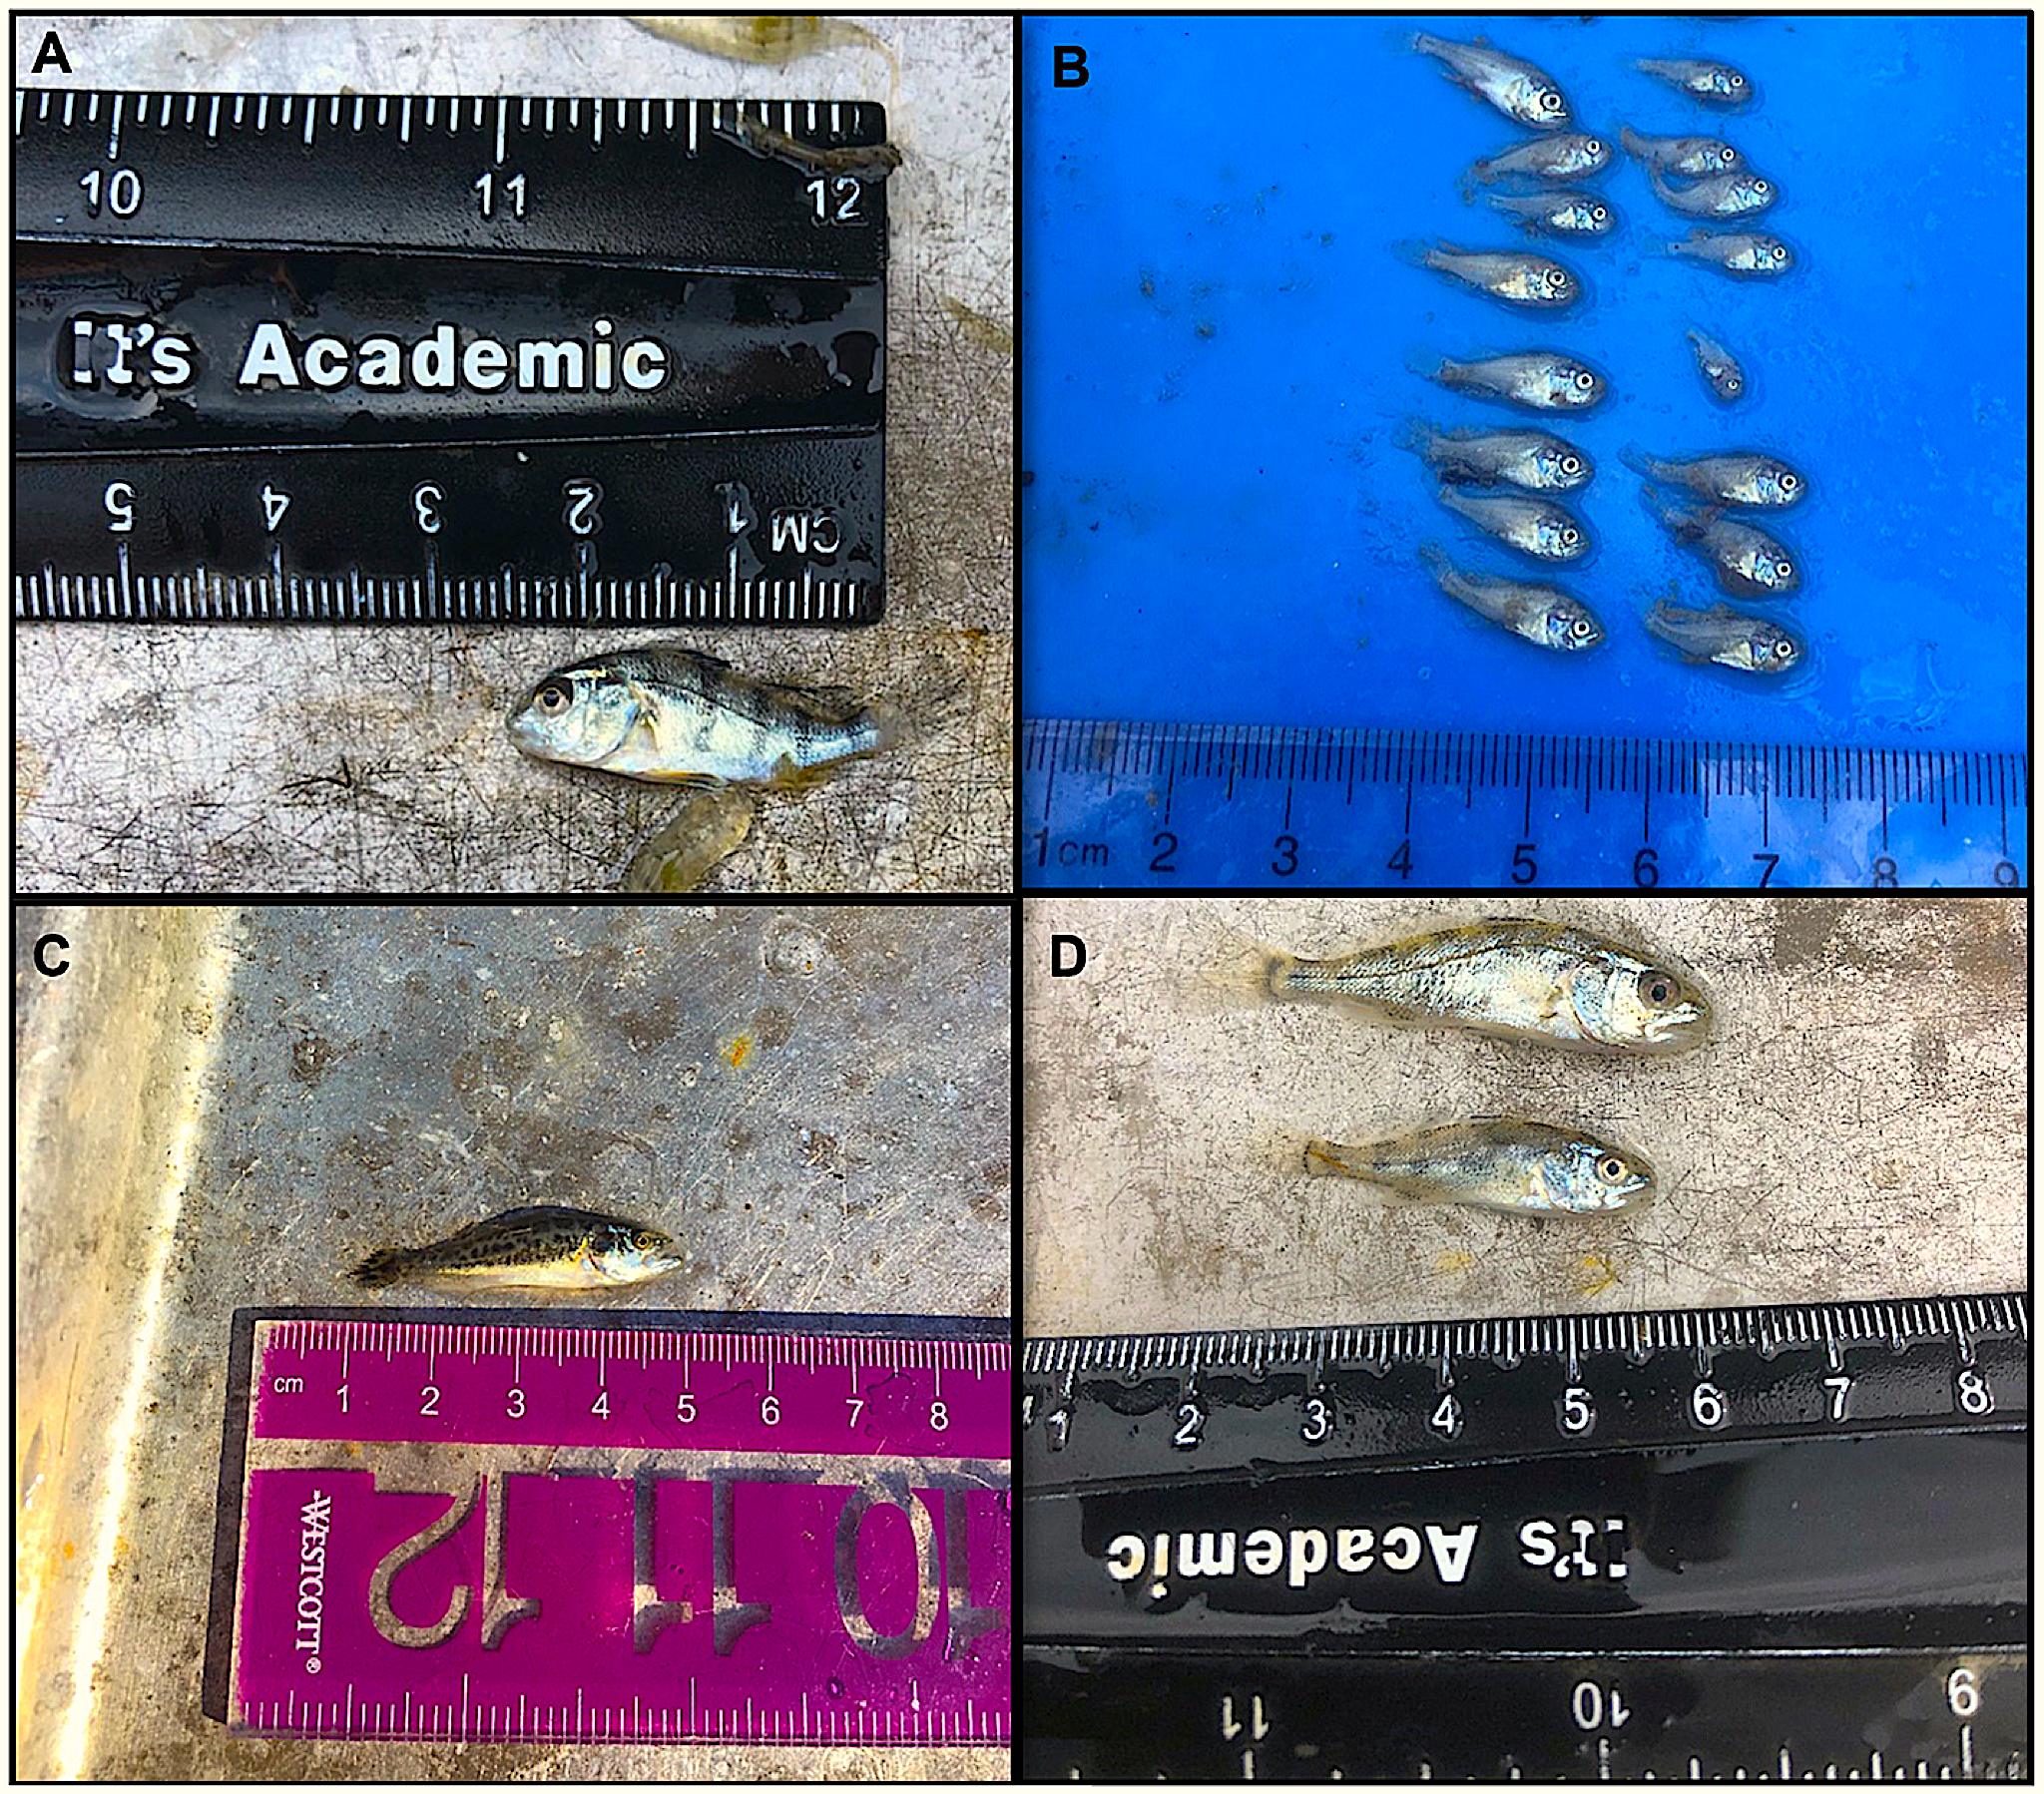 image: Newly hatched fish caught in the May River estuary: (A) black drum, (B) silver perch, (C) spotted seatrout, and (D) red drum. Credit: Monczak et al.